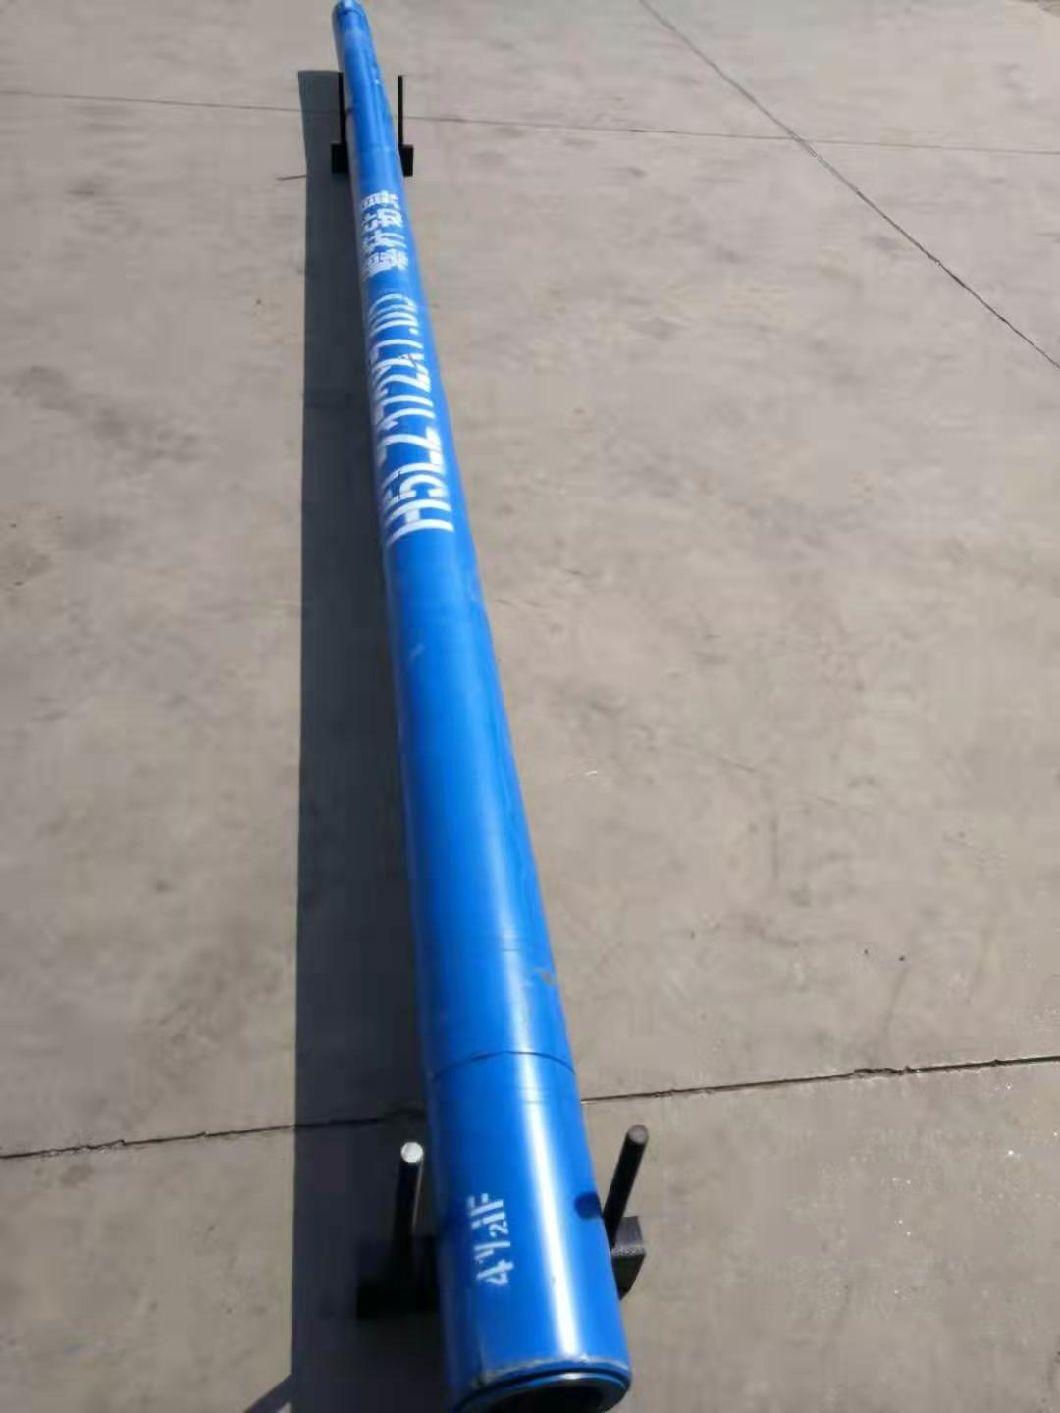 1-11/16" Od Downhole Mud Motor for HDD Downhole Drilling Motor